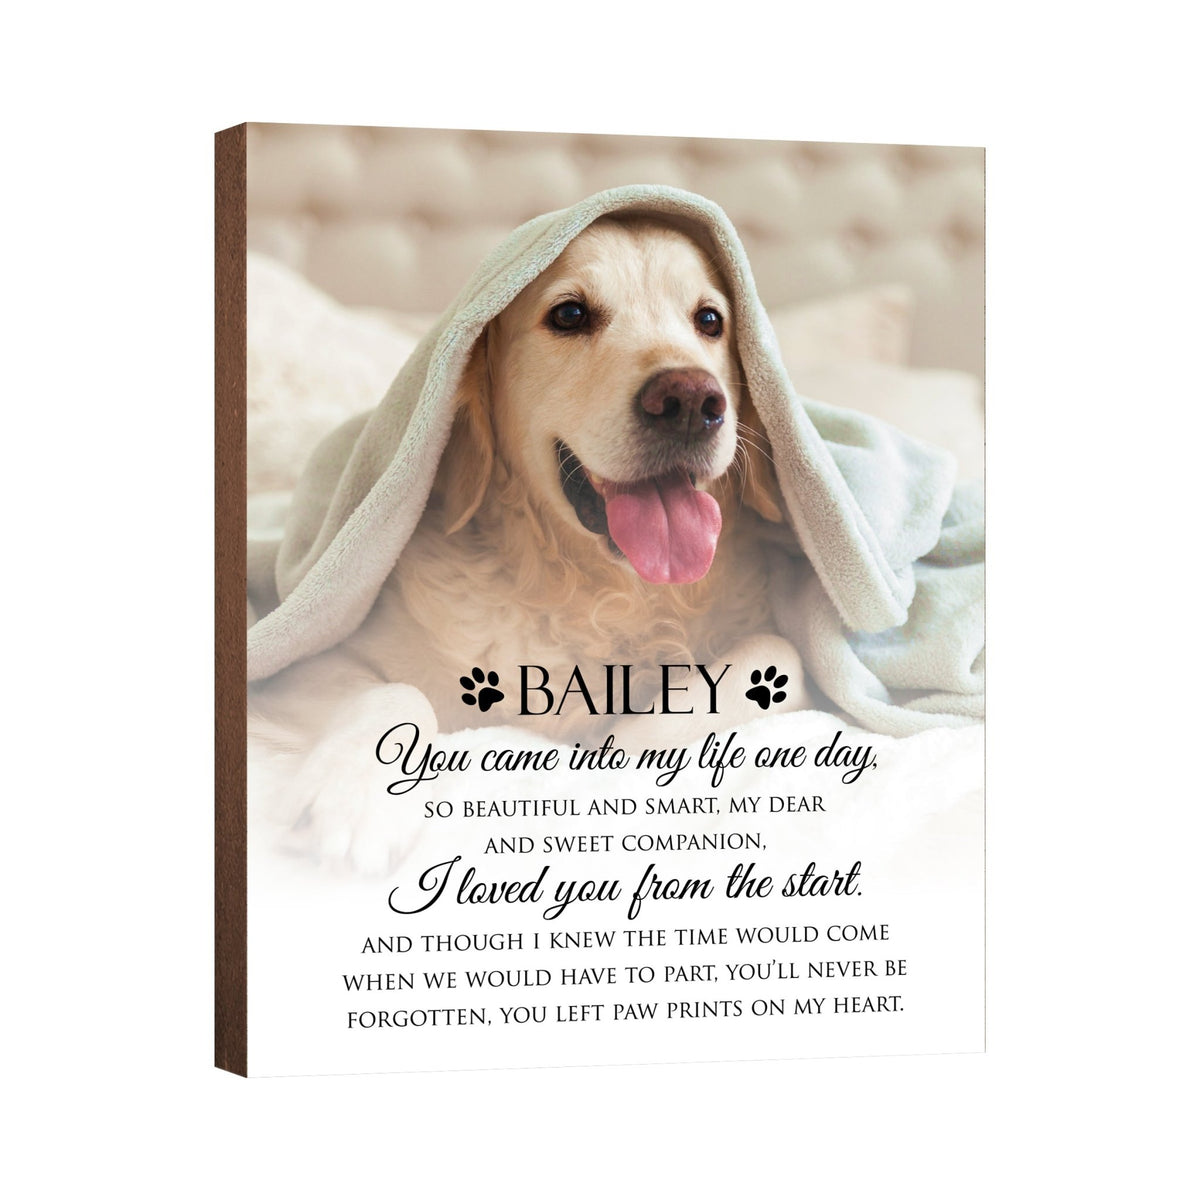 Pet Memorial Custom Photo Wall Plaque Décor - You Came Into My Life One Day - LifeSong Milestones